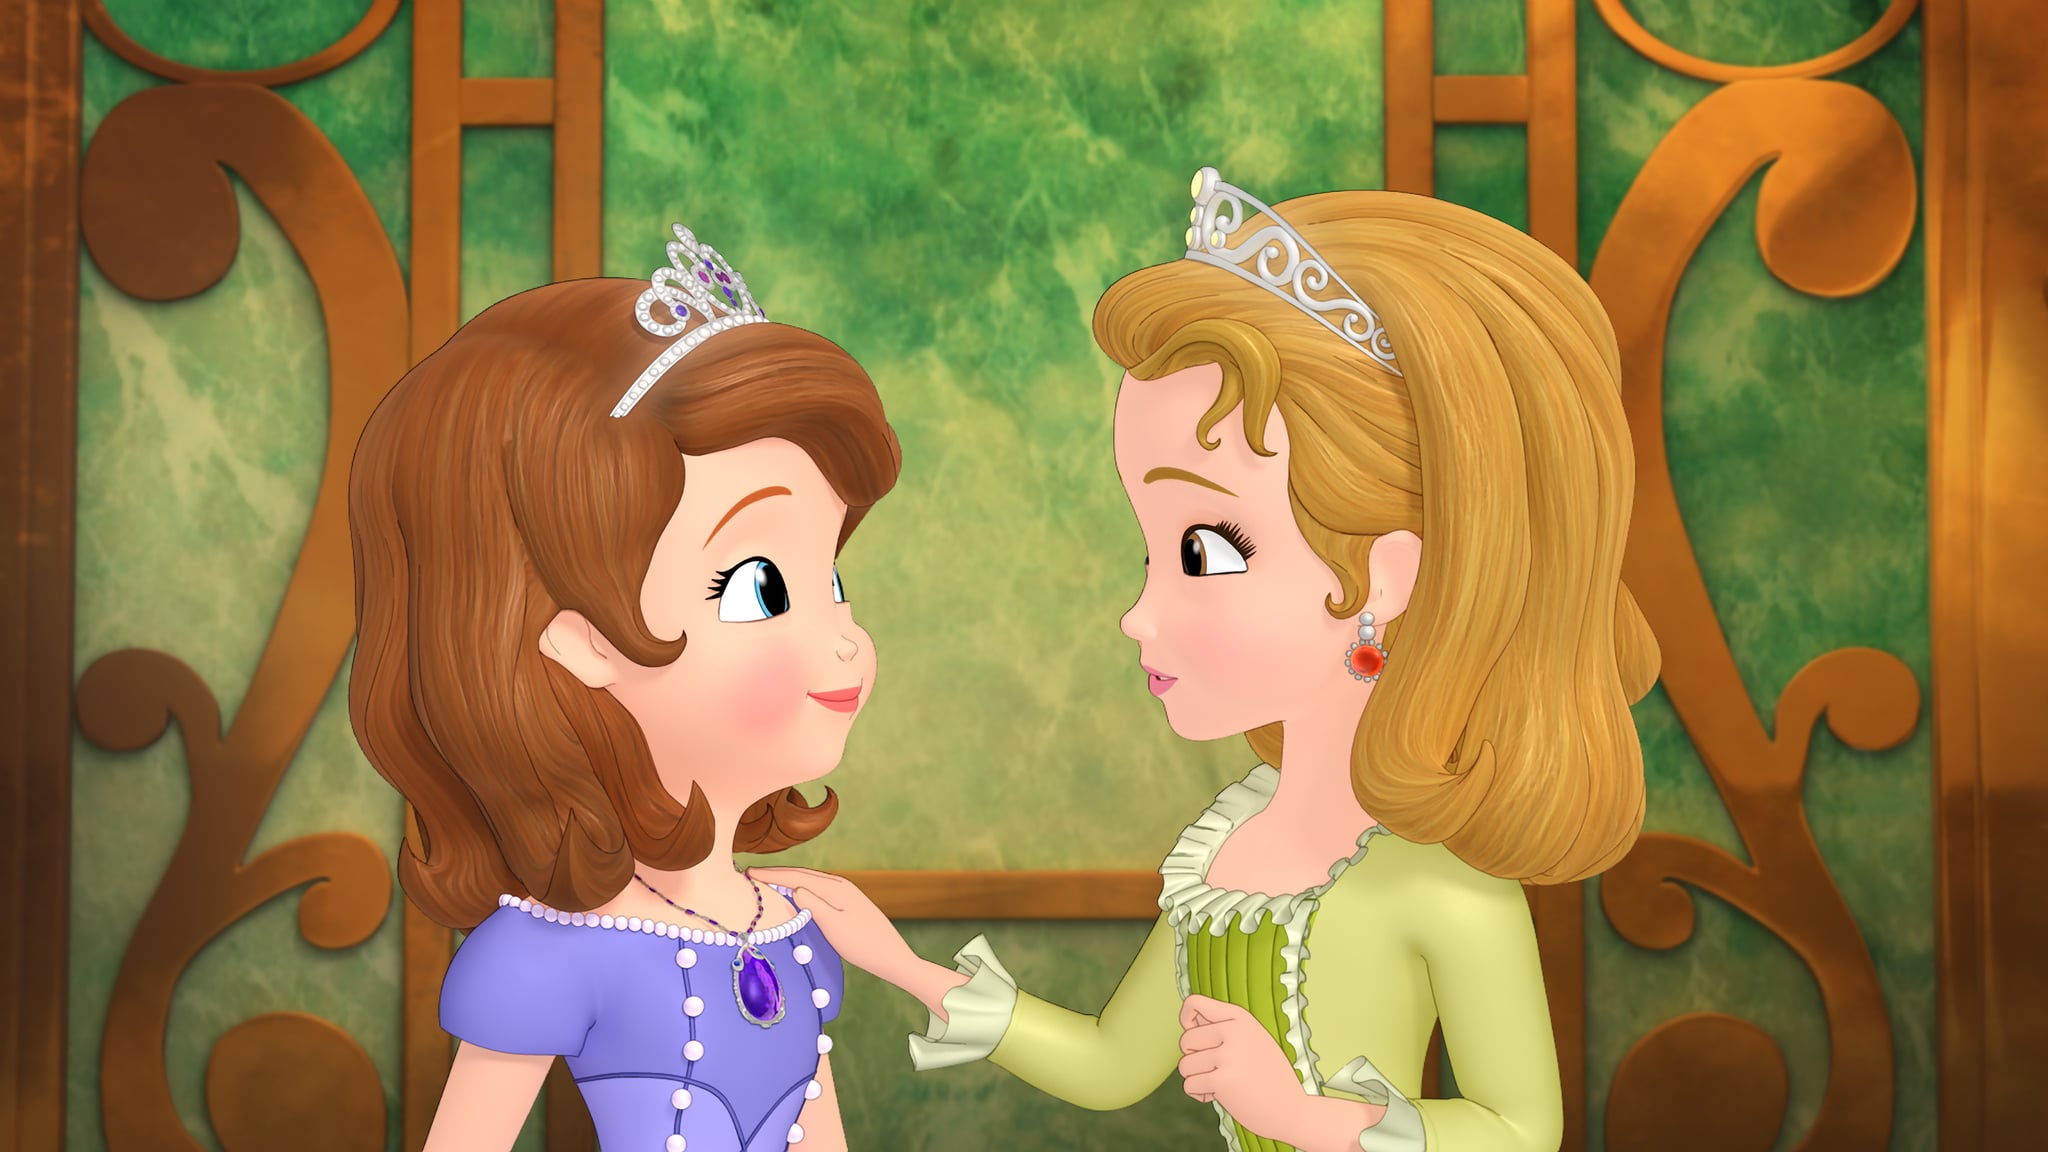 Sofia The First - Princess Sofia And Amber , HD Wallpaper & Backgrounds